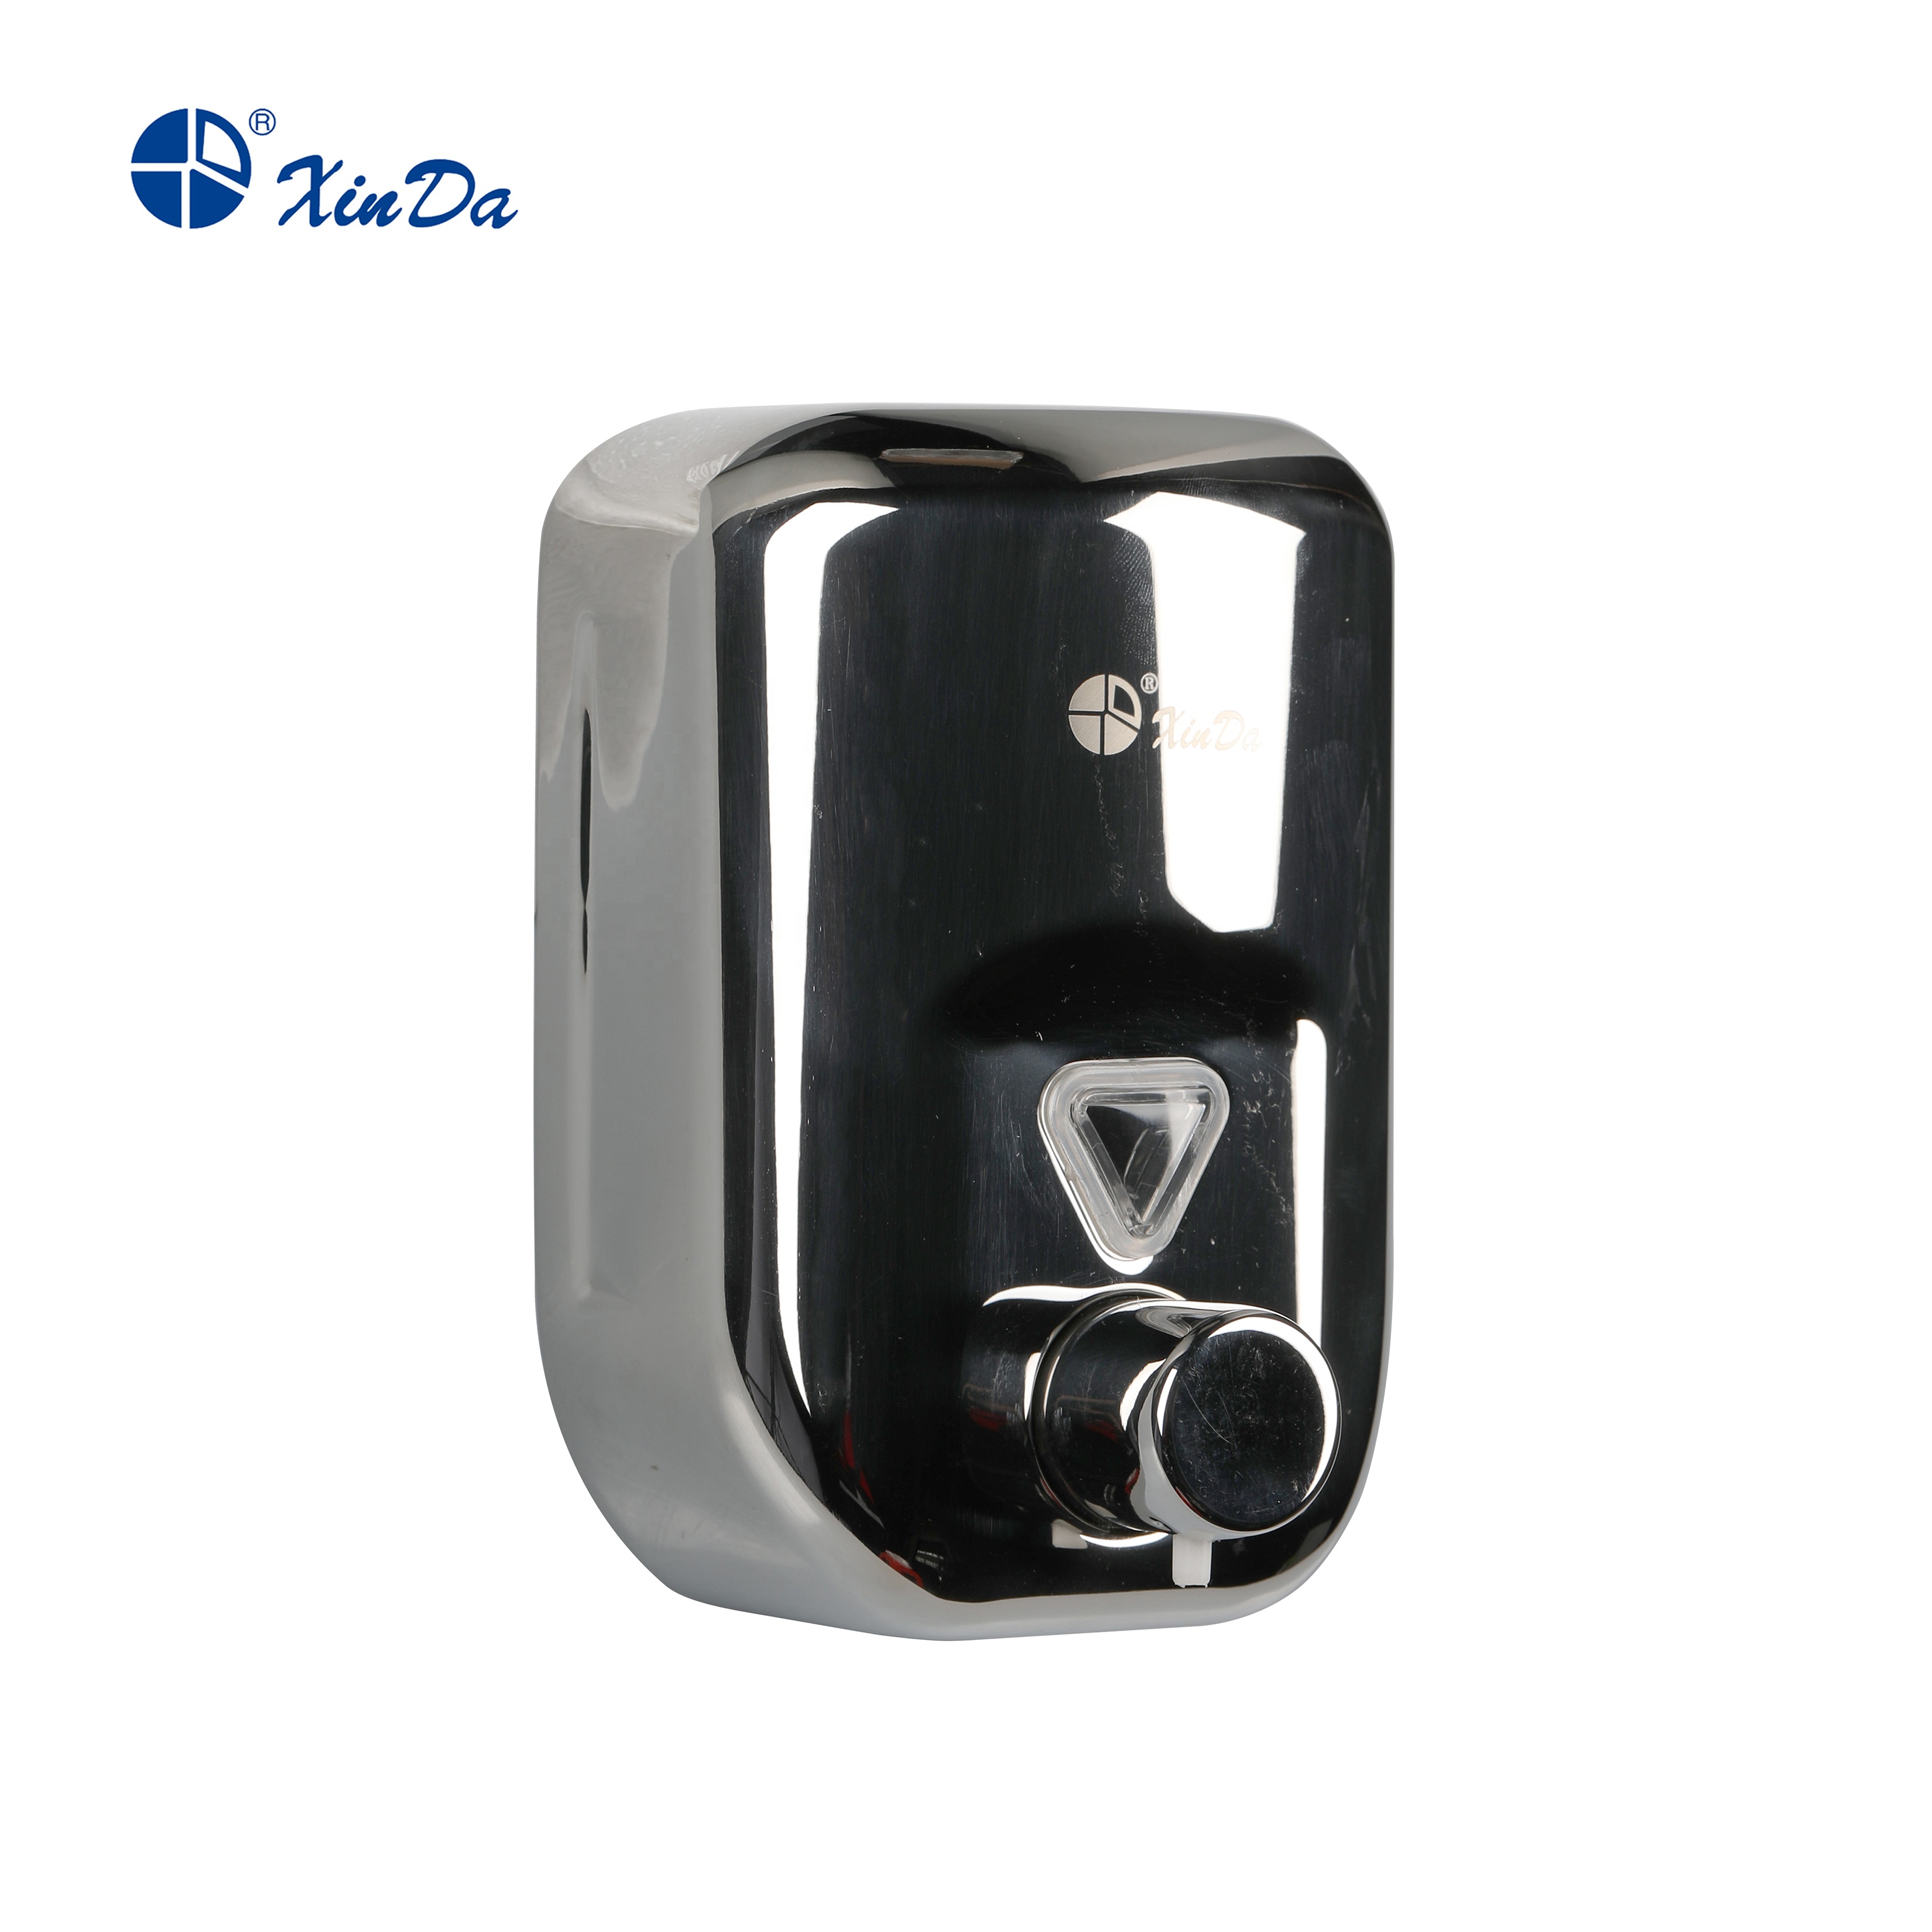 XINDA ZYQ82 Wall Mounted Stainless Steel Hand Liquid Soap Dispenser